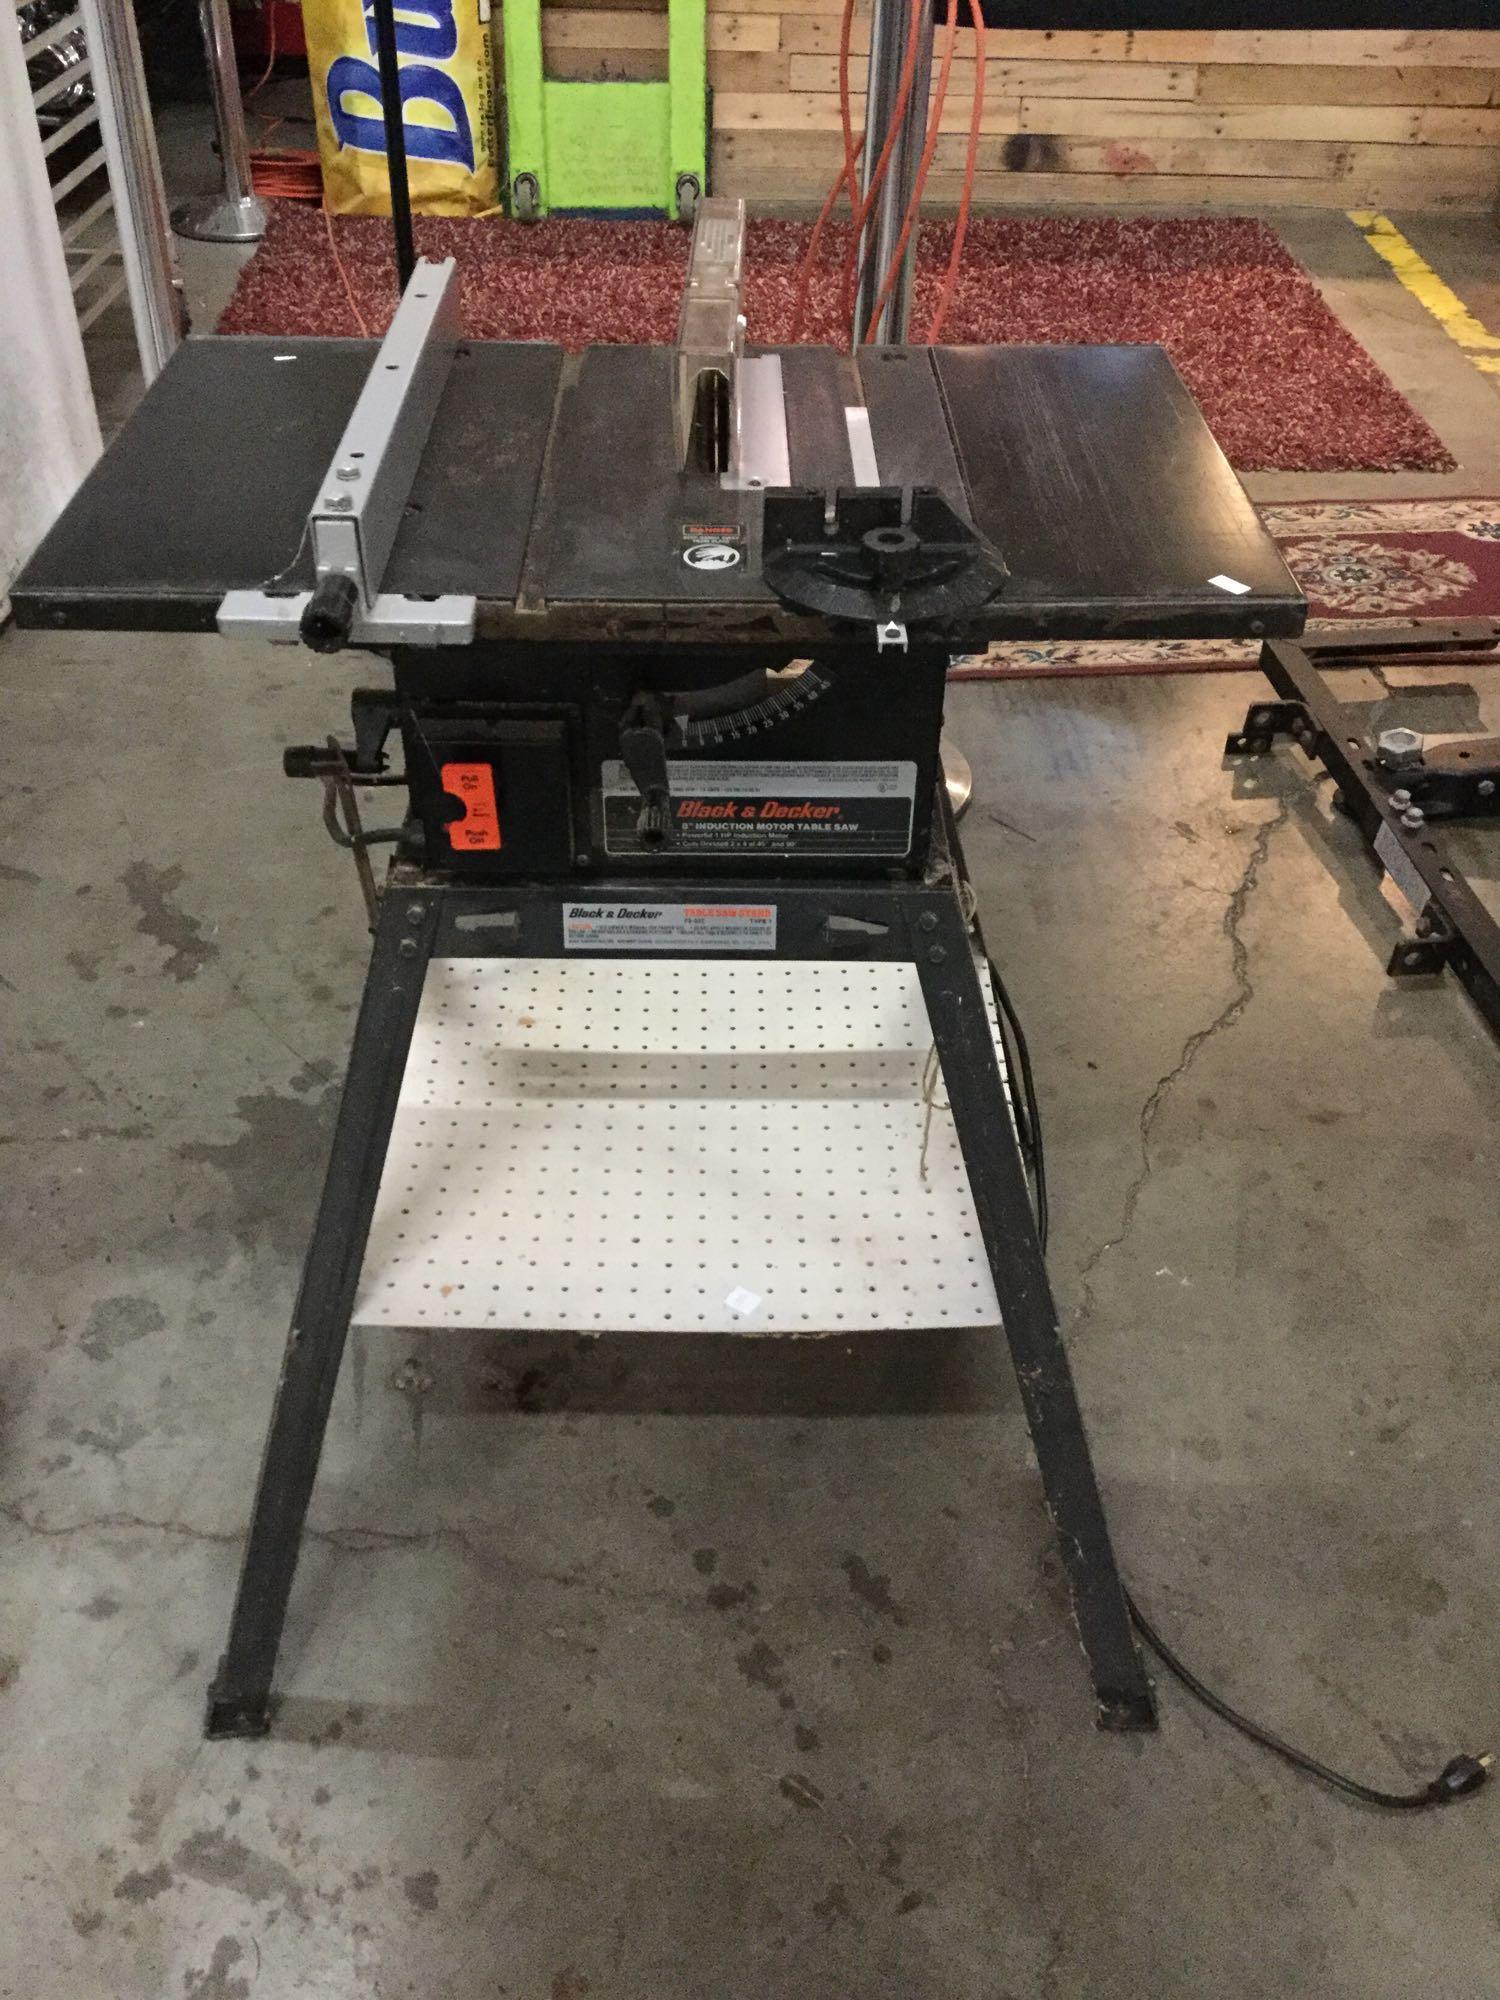 Black and Decker 8 inch Induction Motor Table Saw, Type 2 no. 9419, with  Black and Decker stand